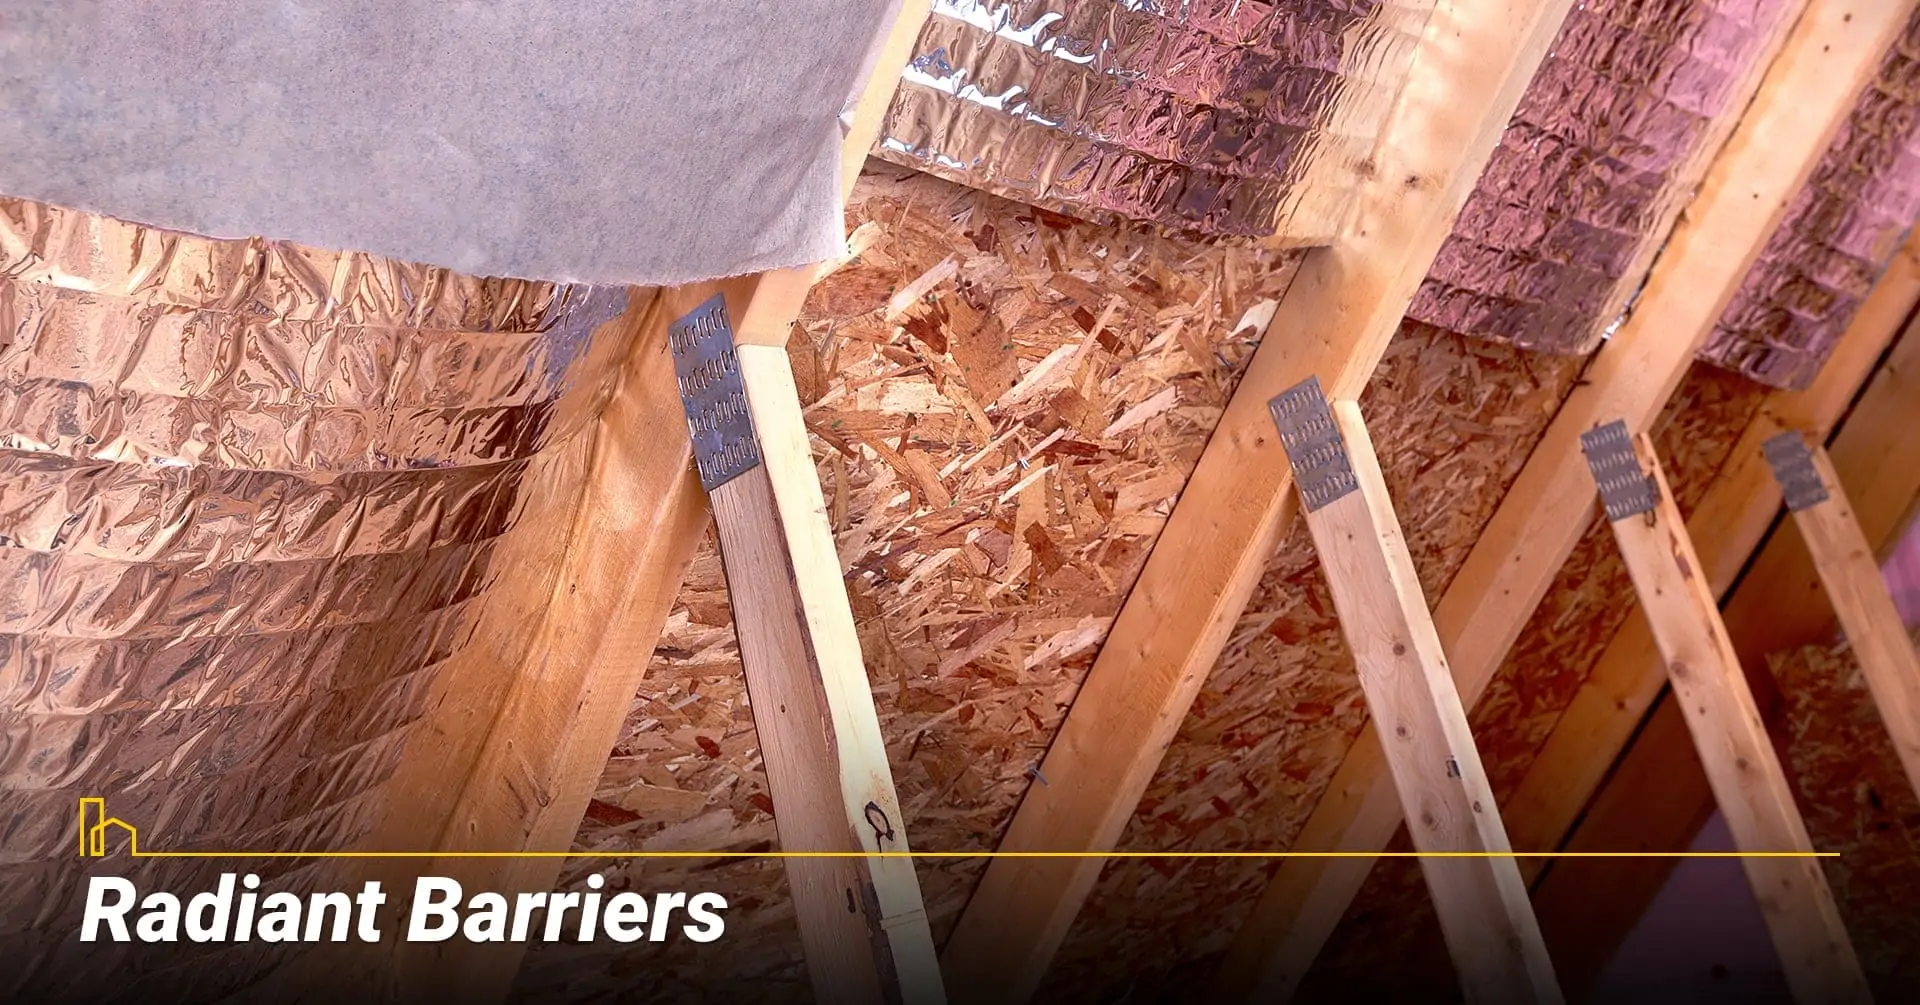 Radiant Barriers, use radiant barriers as insulation